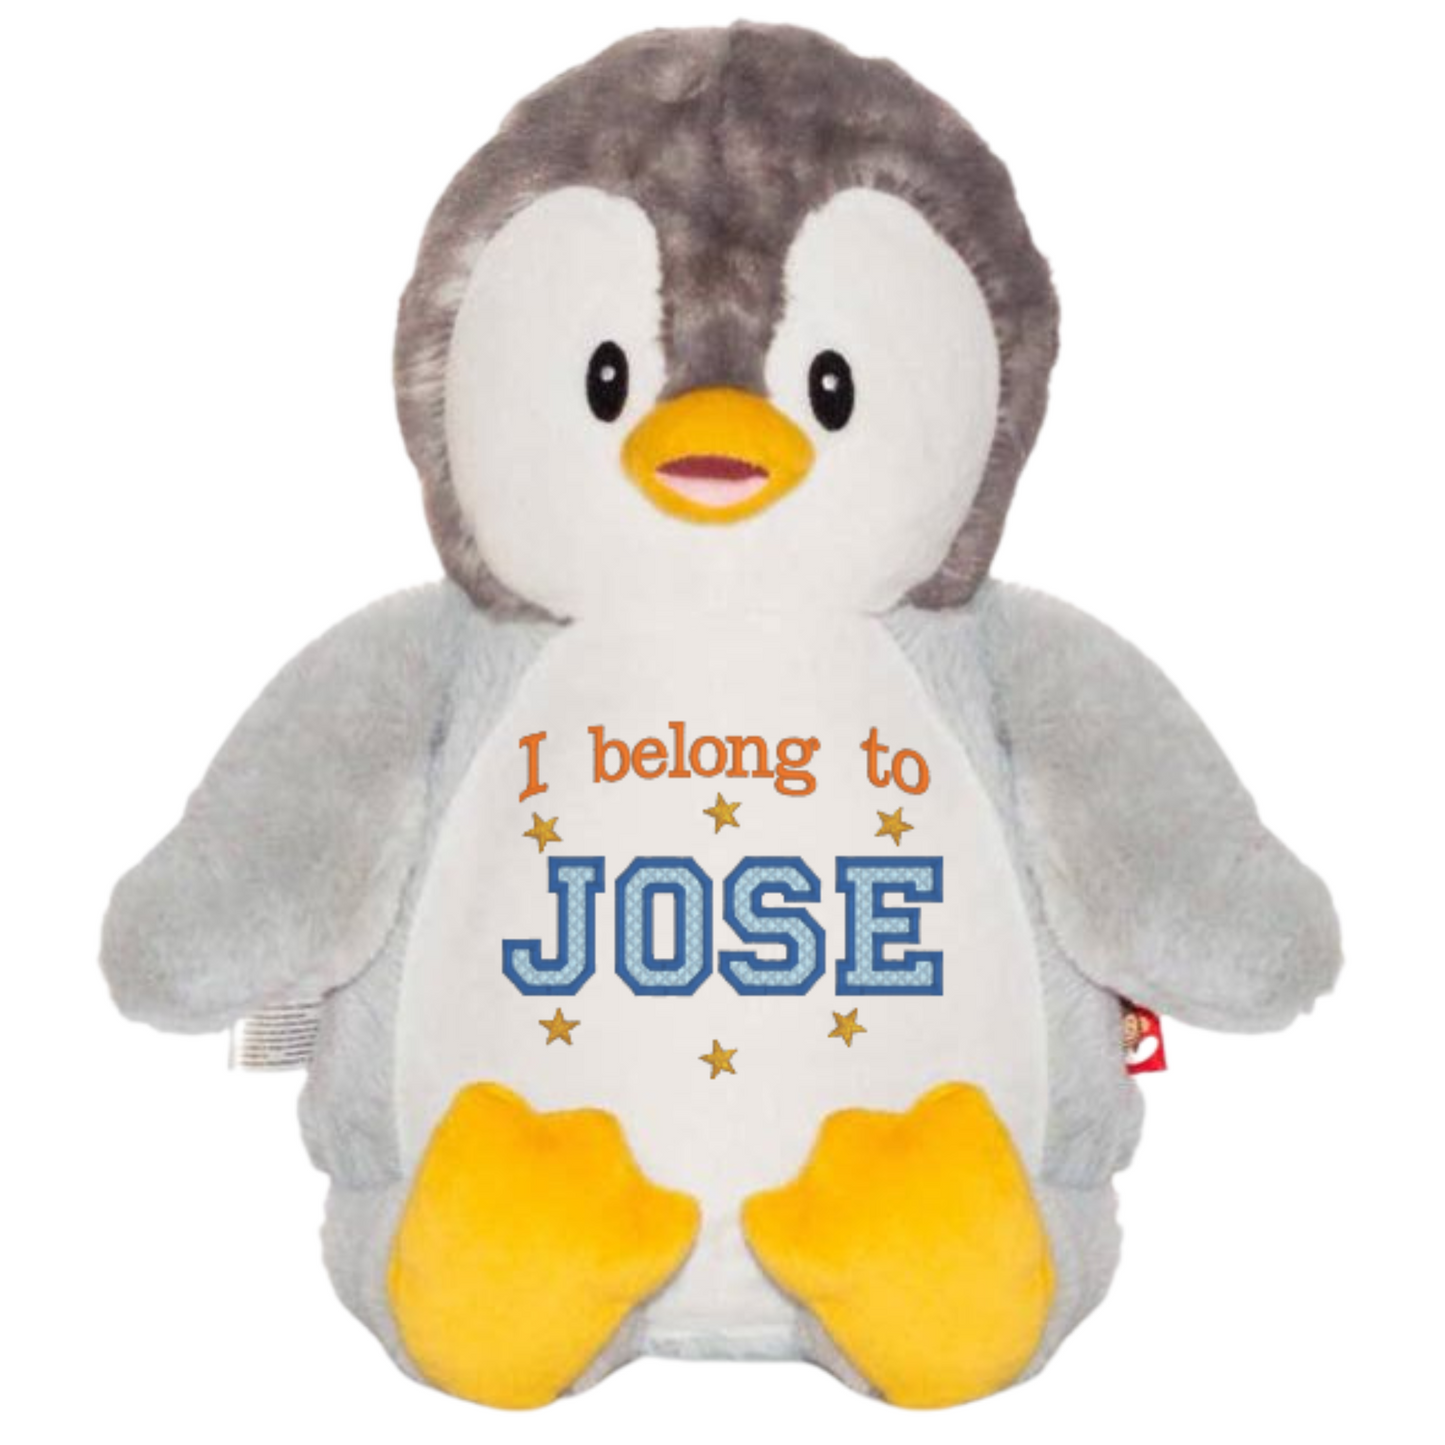 Penguin Stuffed Animal Personalized with name for a boy